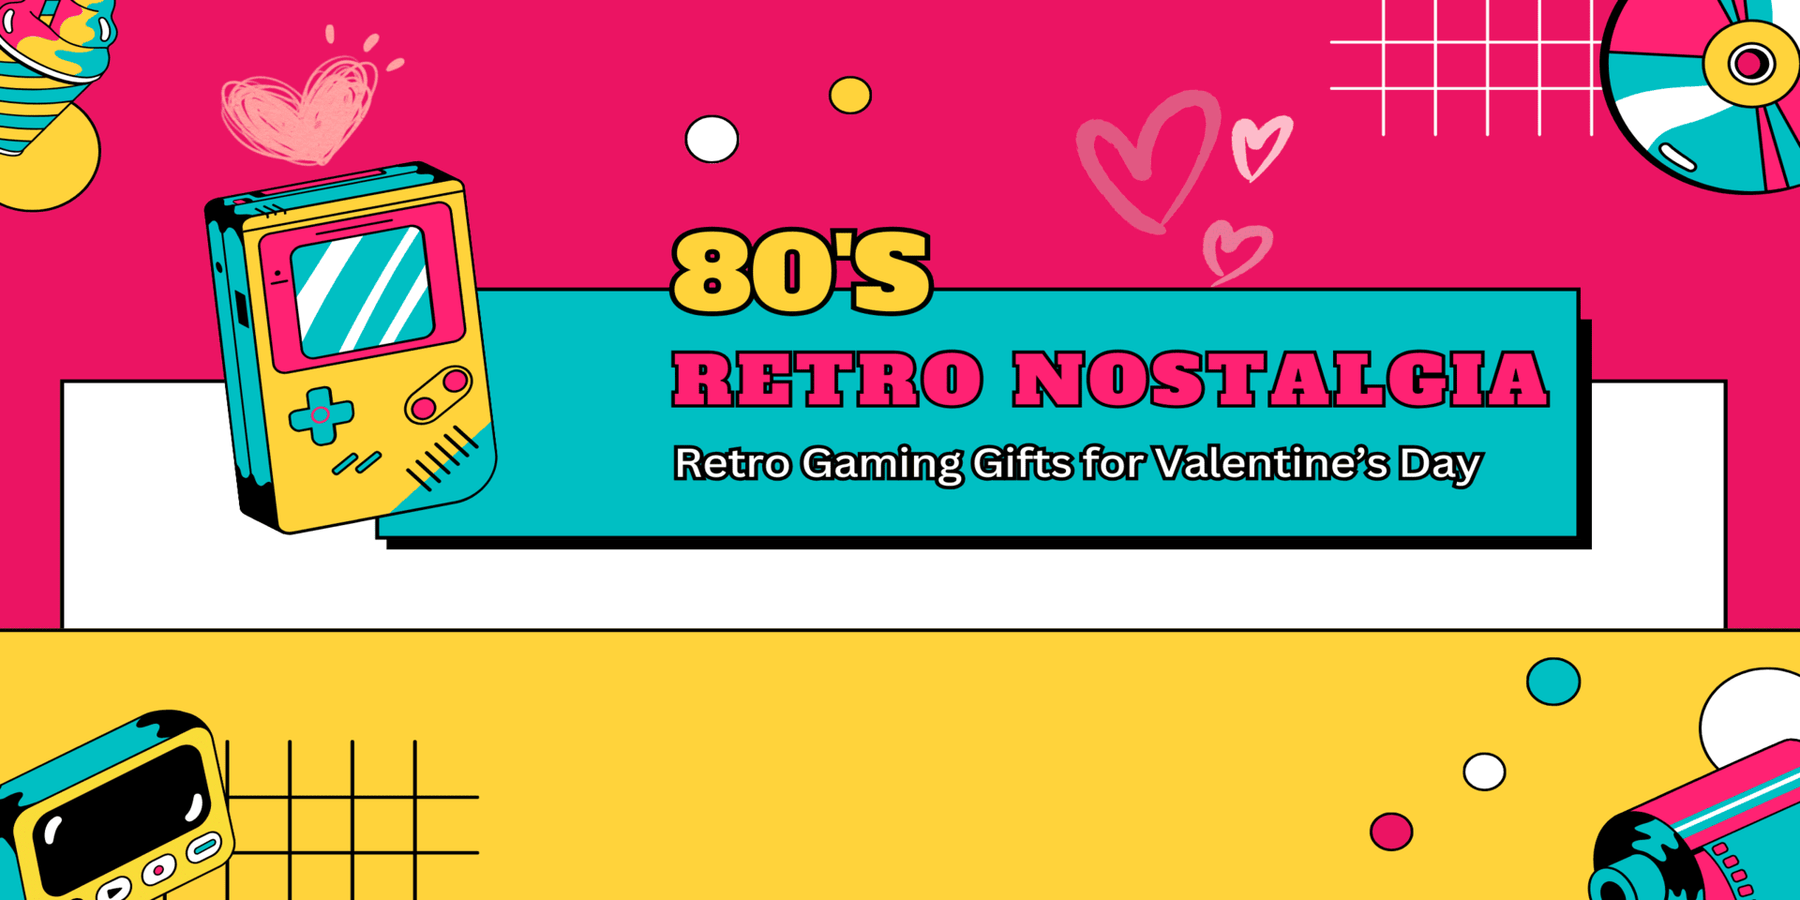 Retro Gaming Romance: Valentine's Day Gifts for Him That Level Up the Fun! 🎮💕